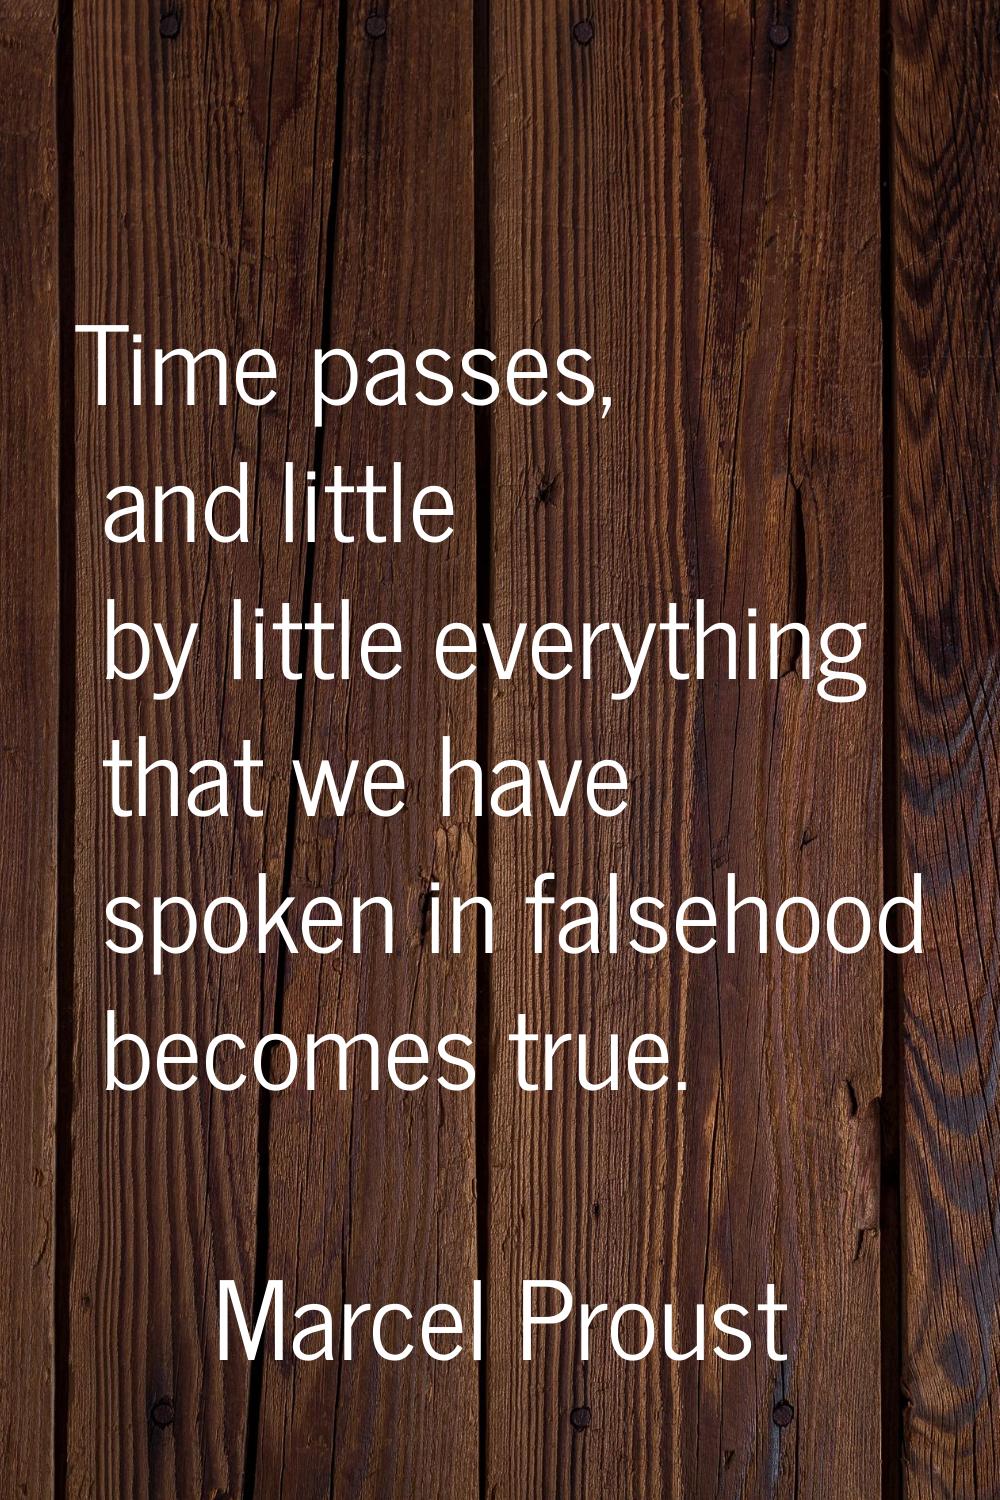 Time passes, and little by little everything that we have spoken in falsehood becomes true.